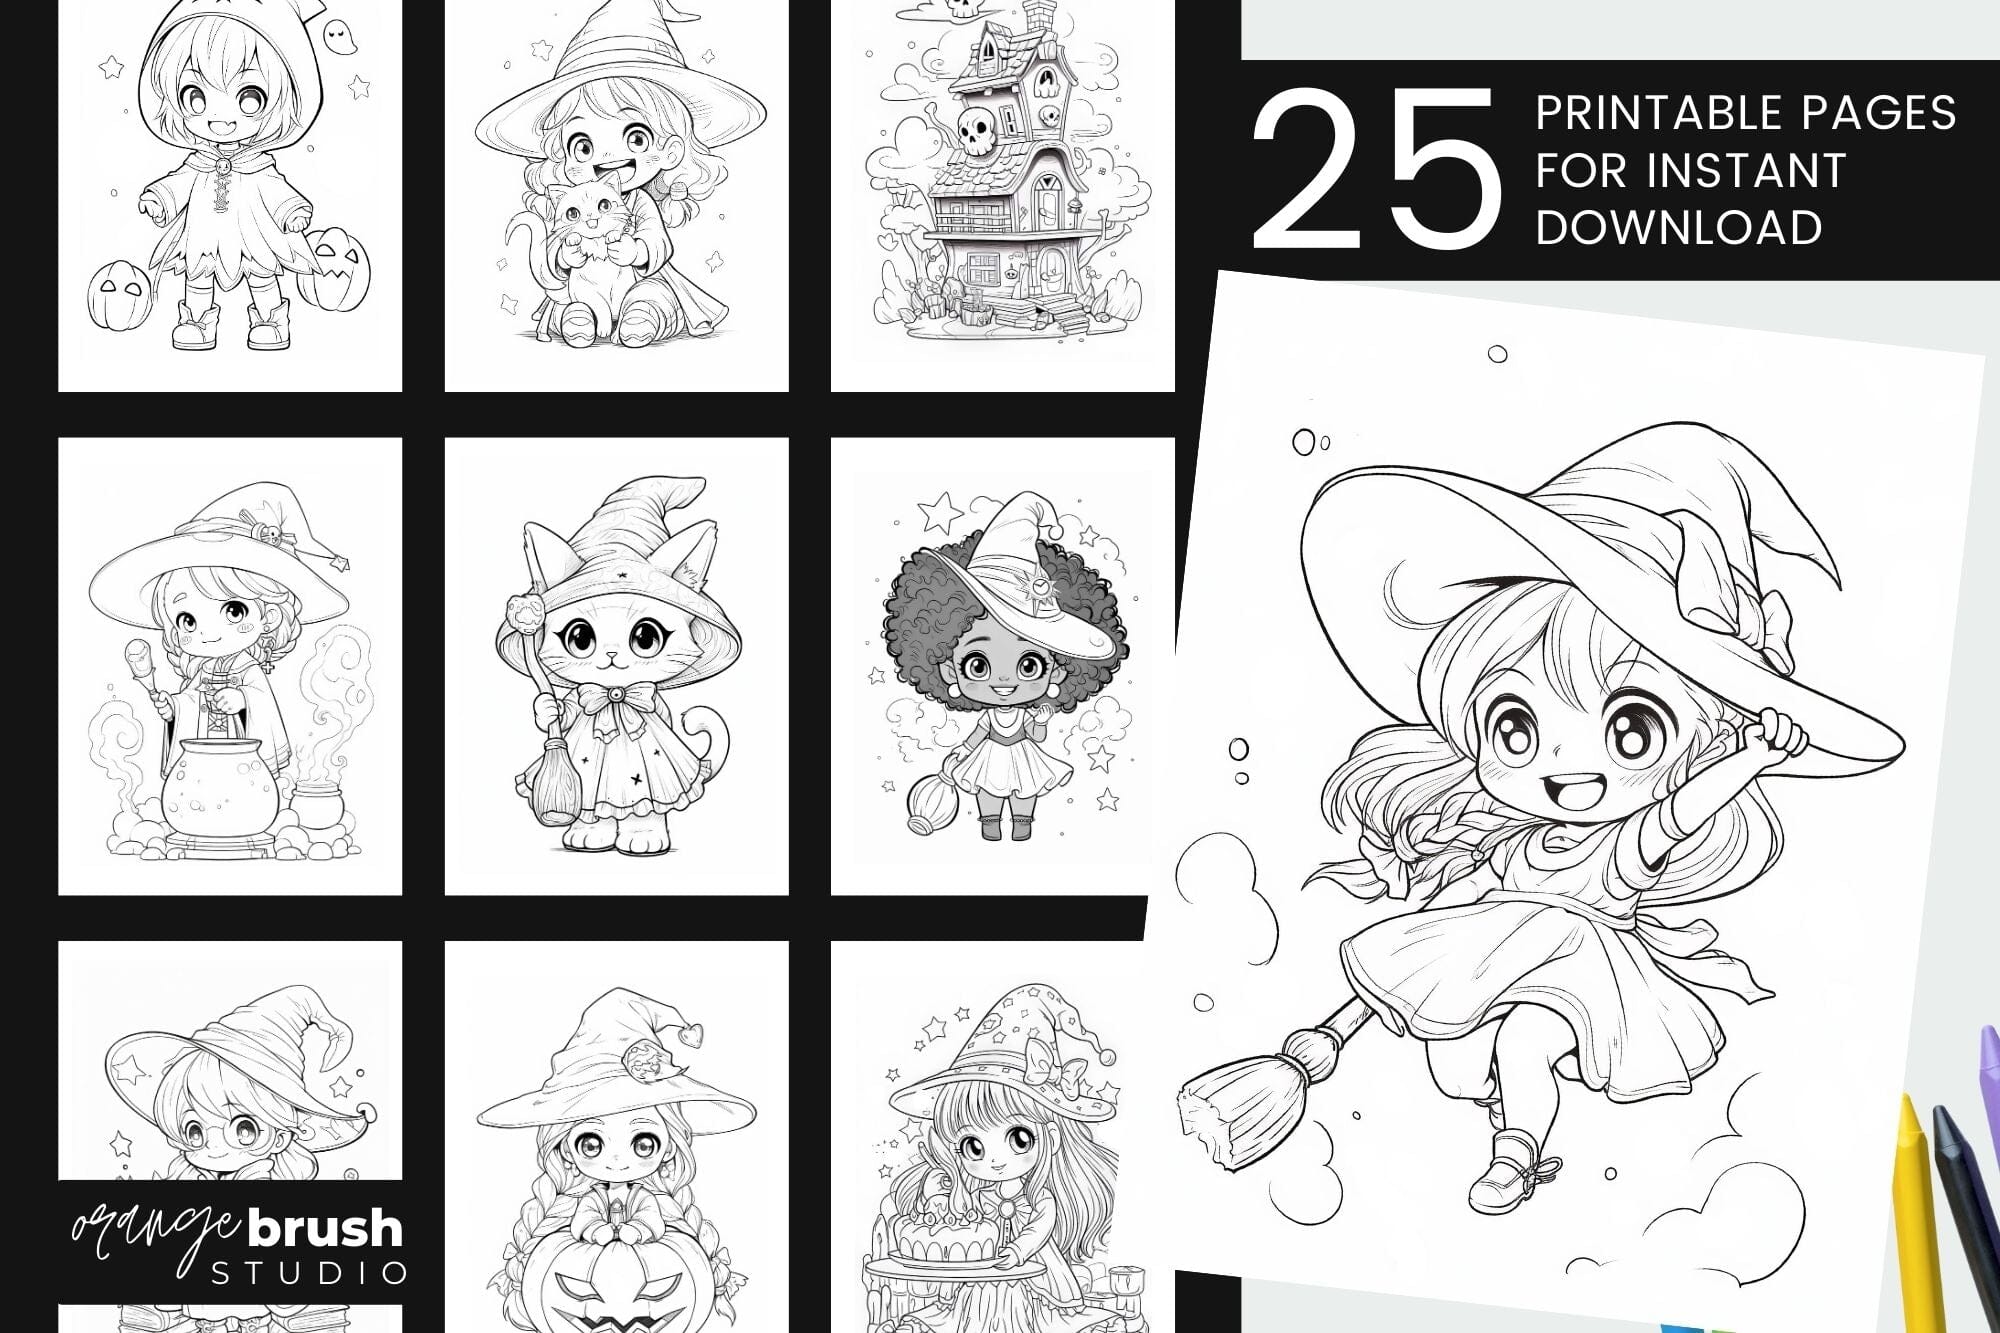 Kawaii witch coloring book halloween coloring page bundle